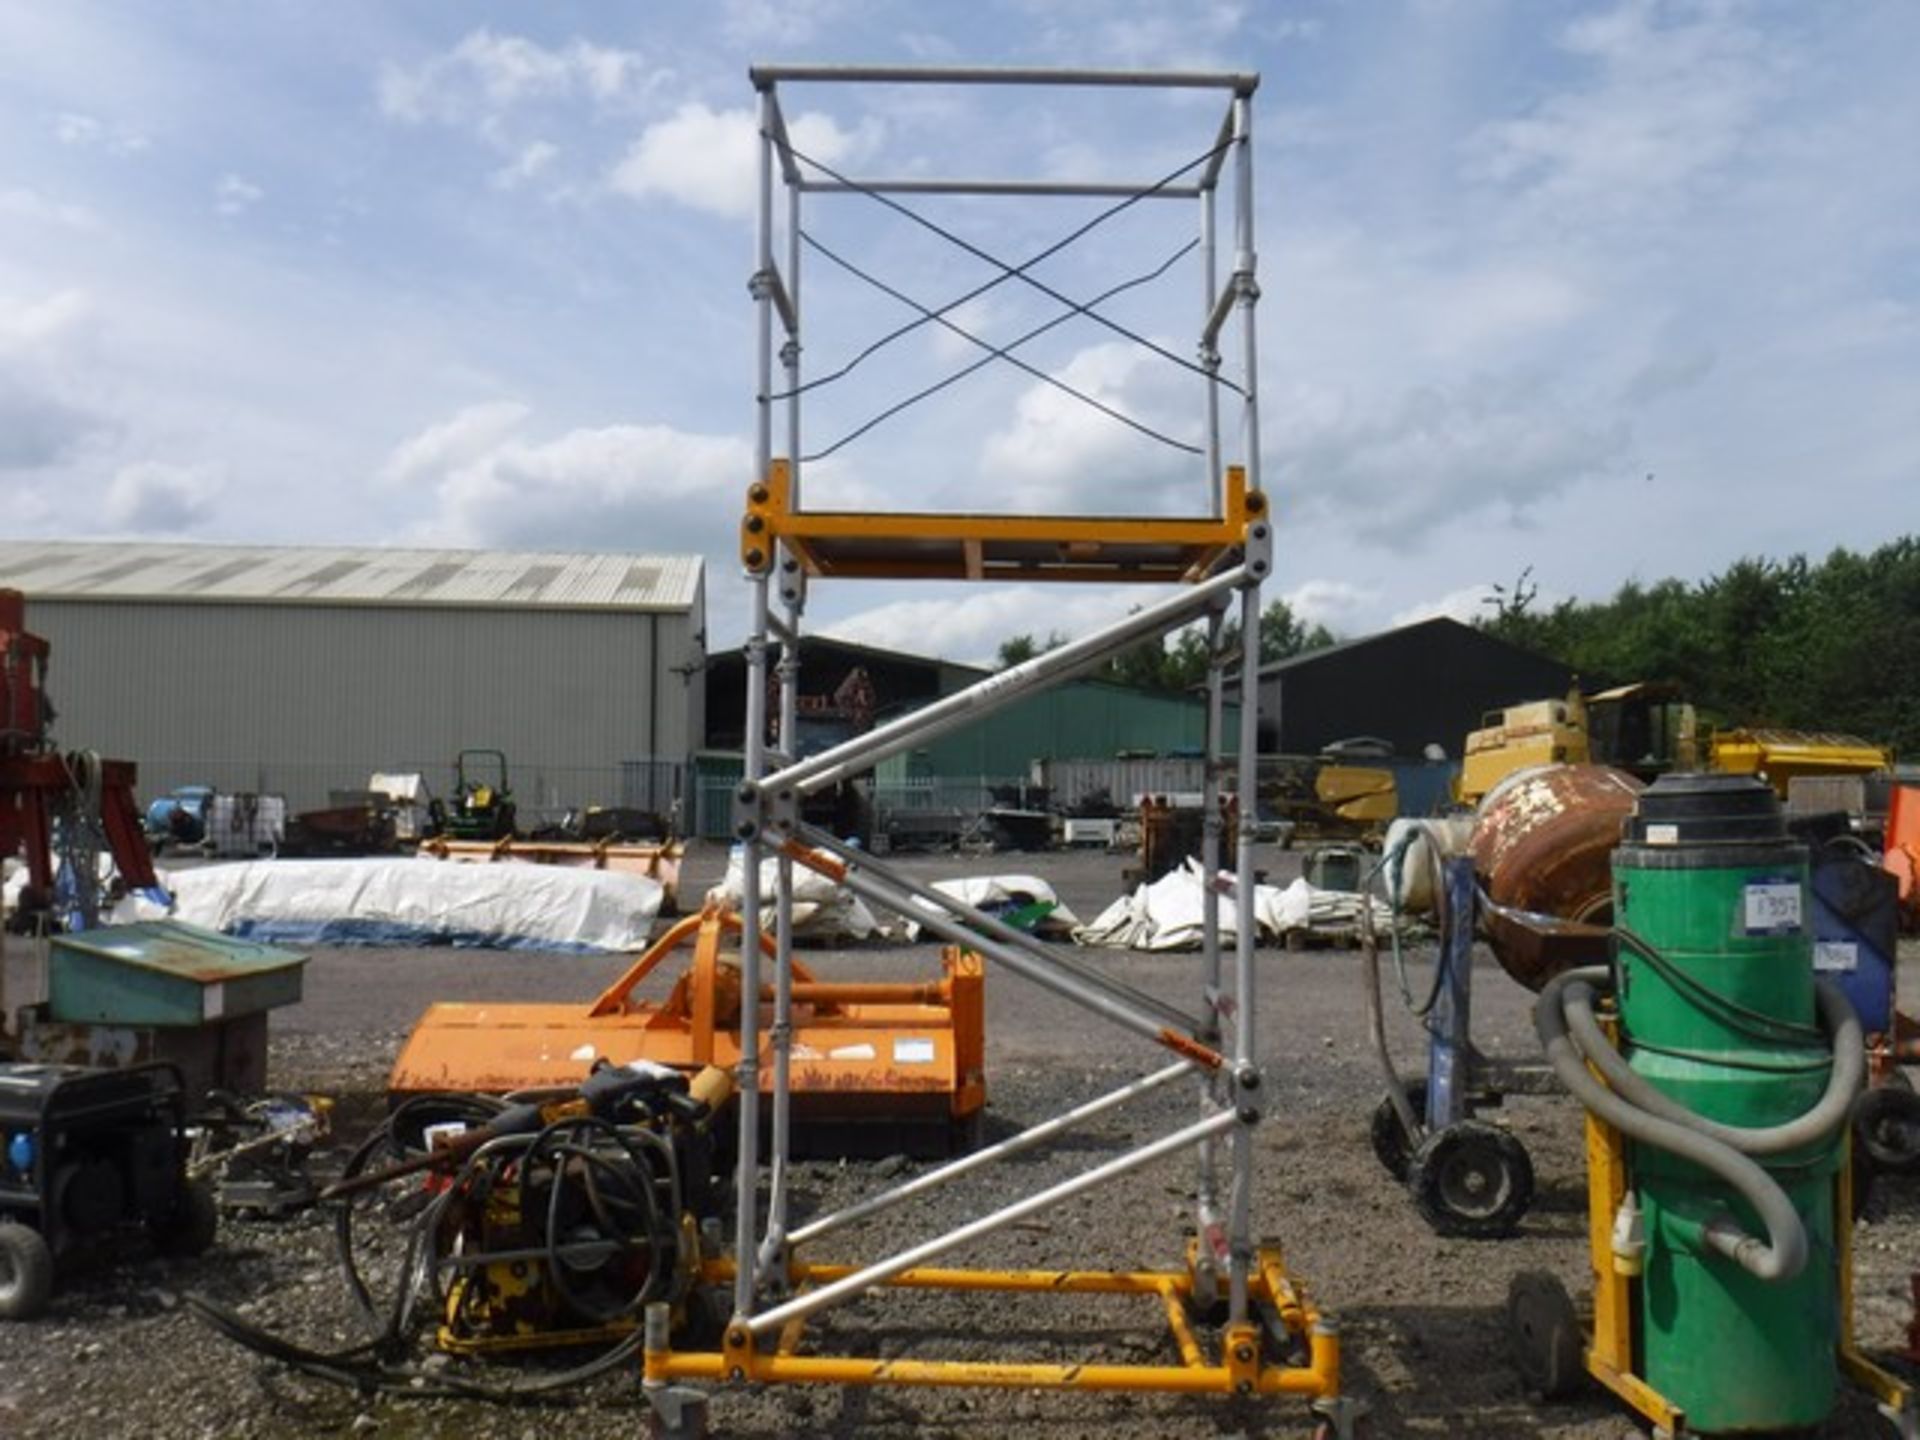 PORTABLE ALLOY TOWER - Image 2 of 2